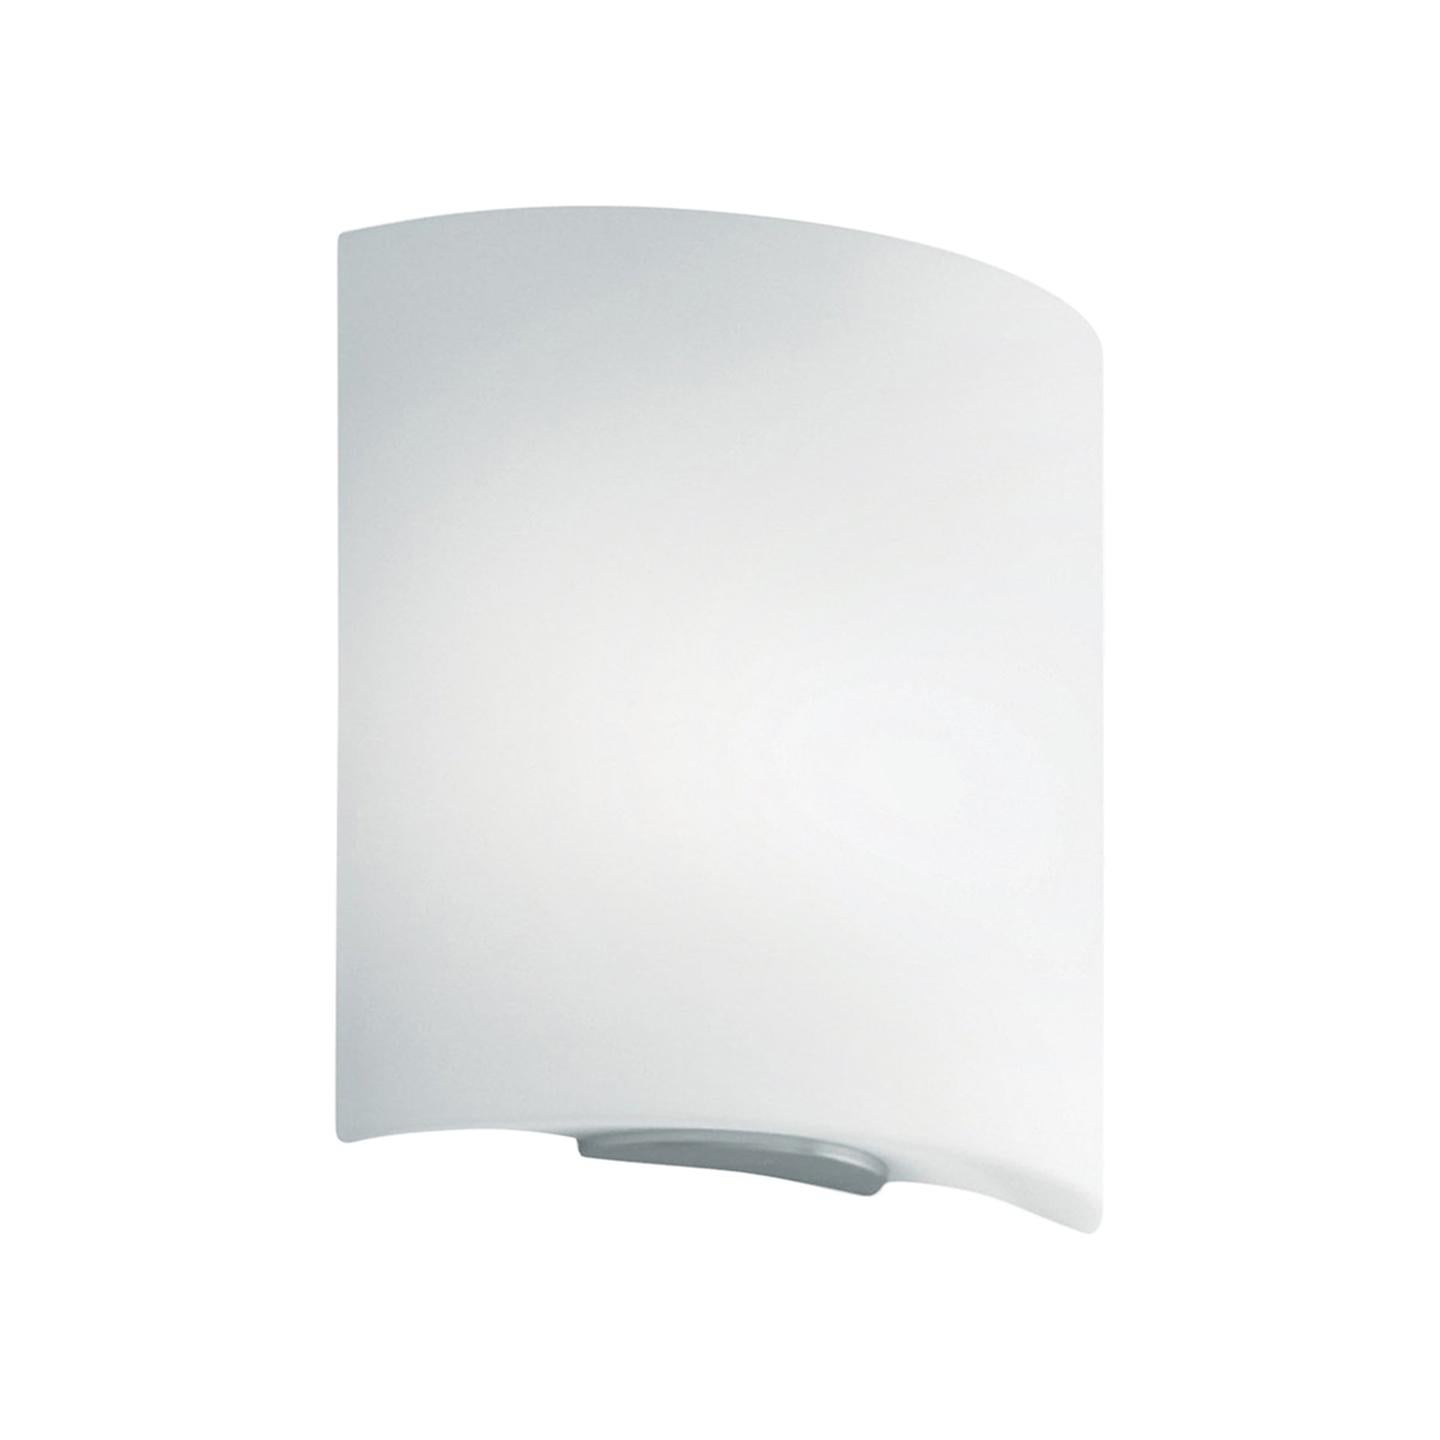 Leucos Celine P 25 LED Wall Sconce in Satin White & Brushed Nickel by Design Lab